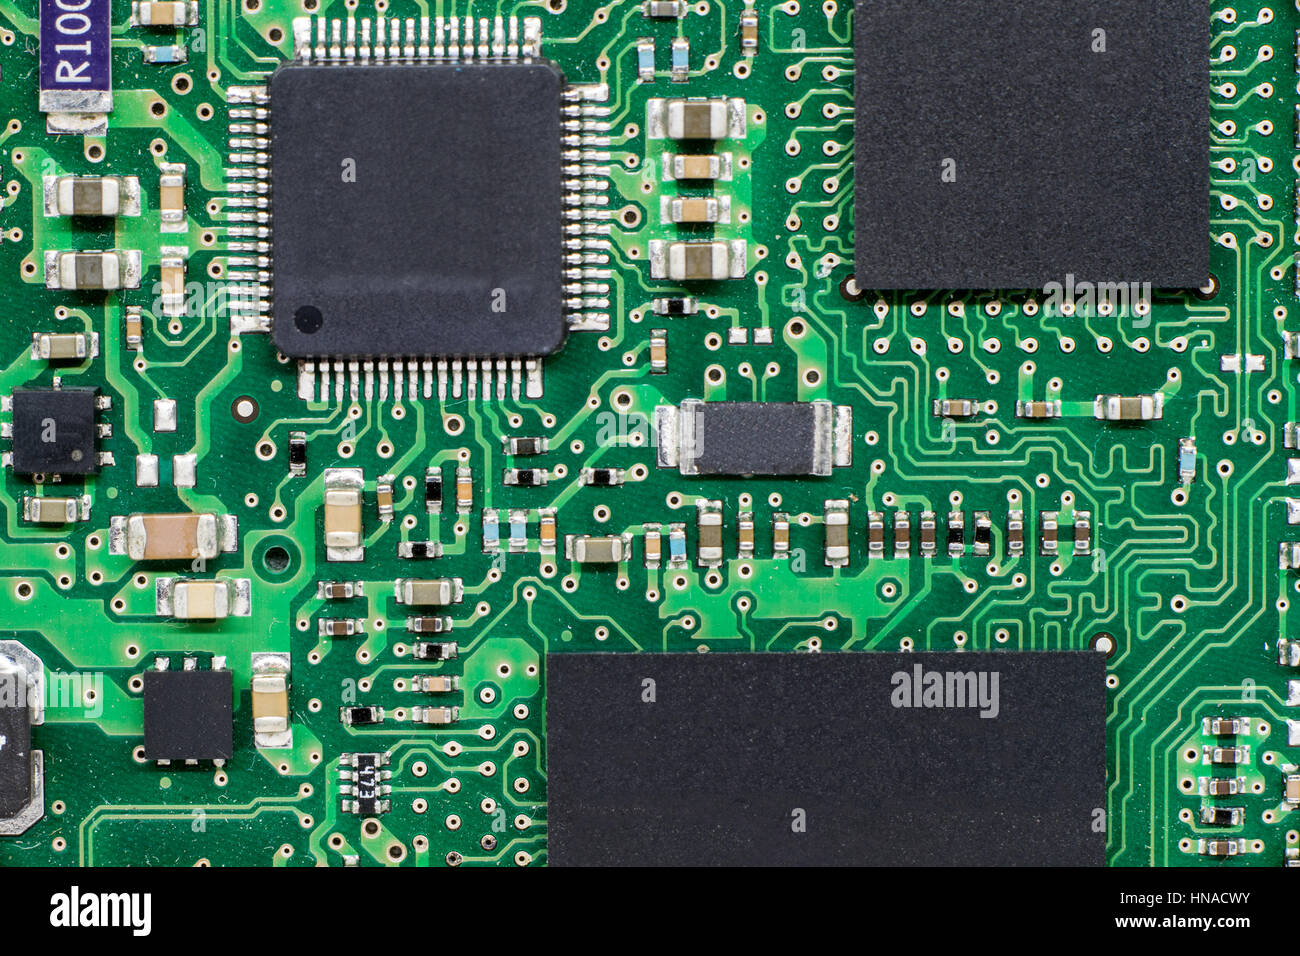 smd printed electronic circuit board with microcontroller and components; Stock Photo